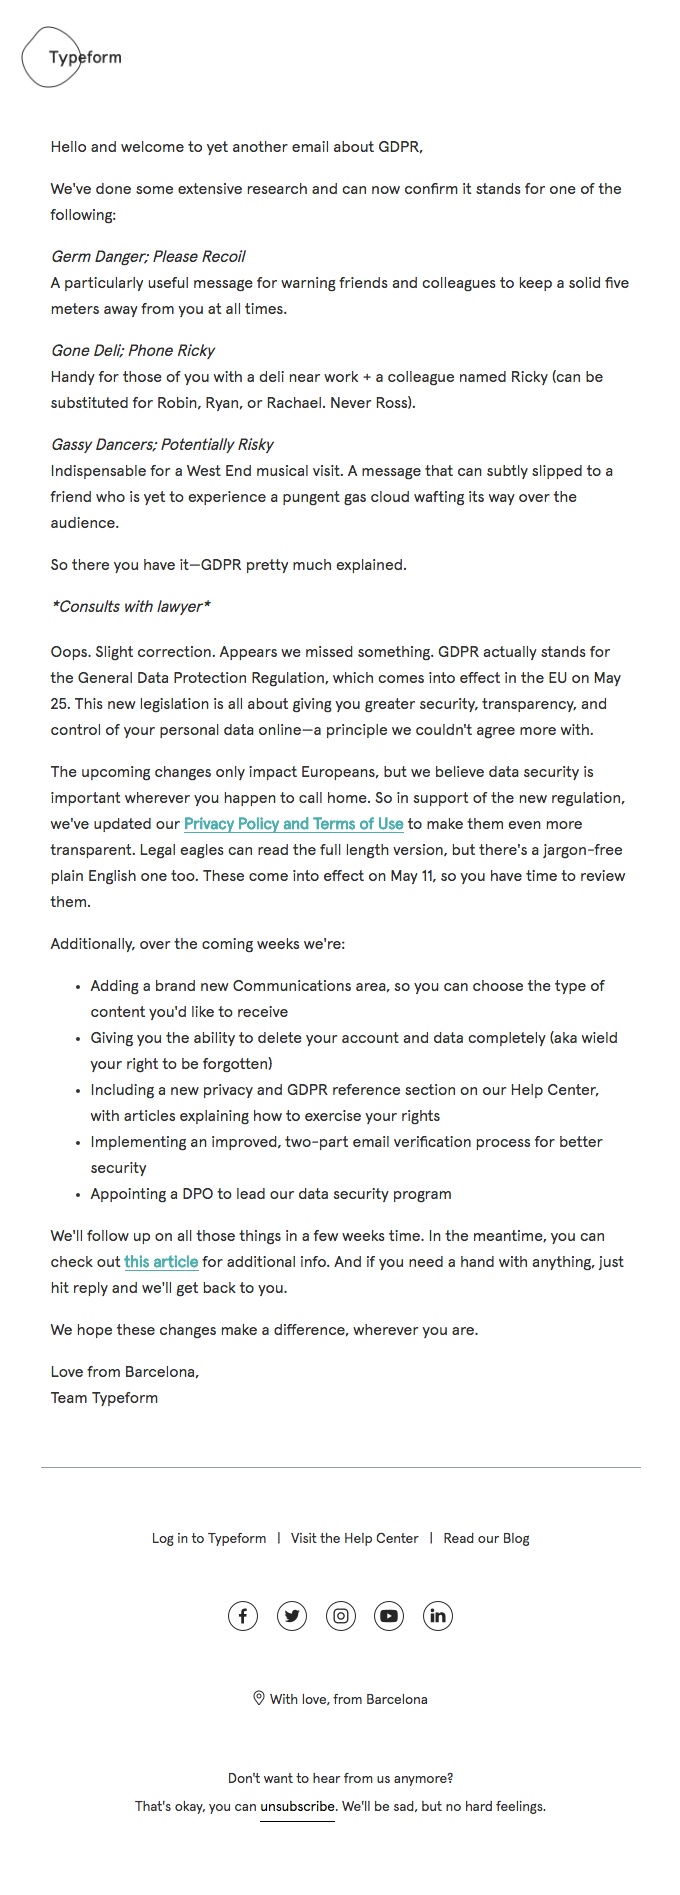 Updates to our Privacy Policy and your data